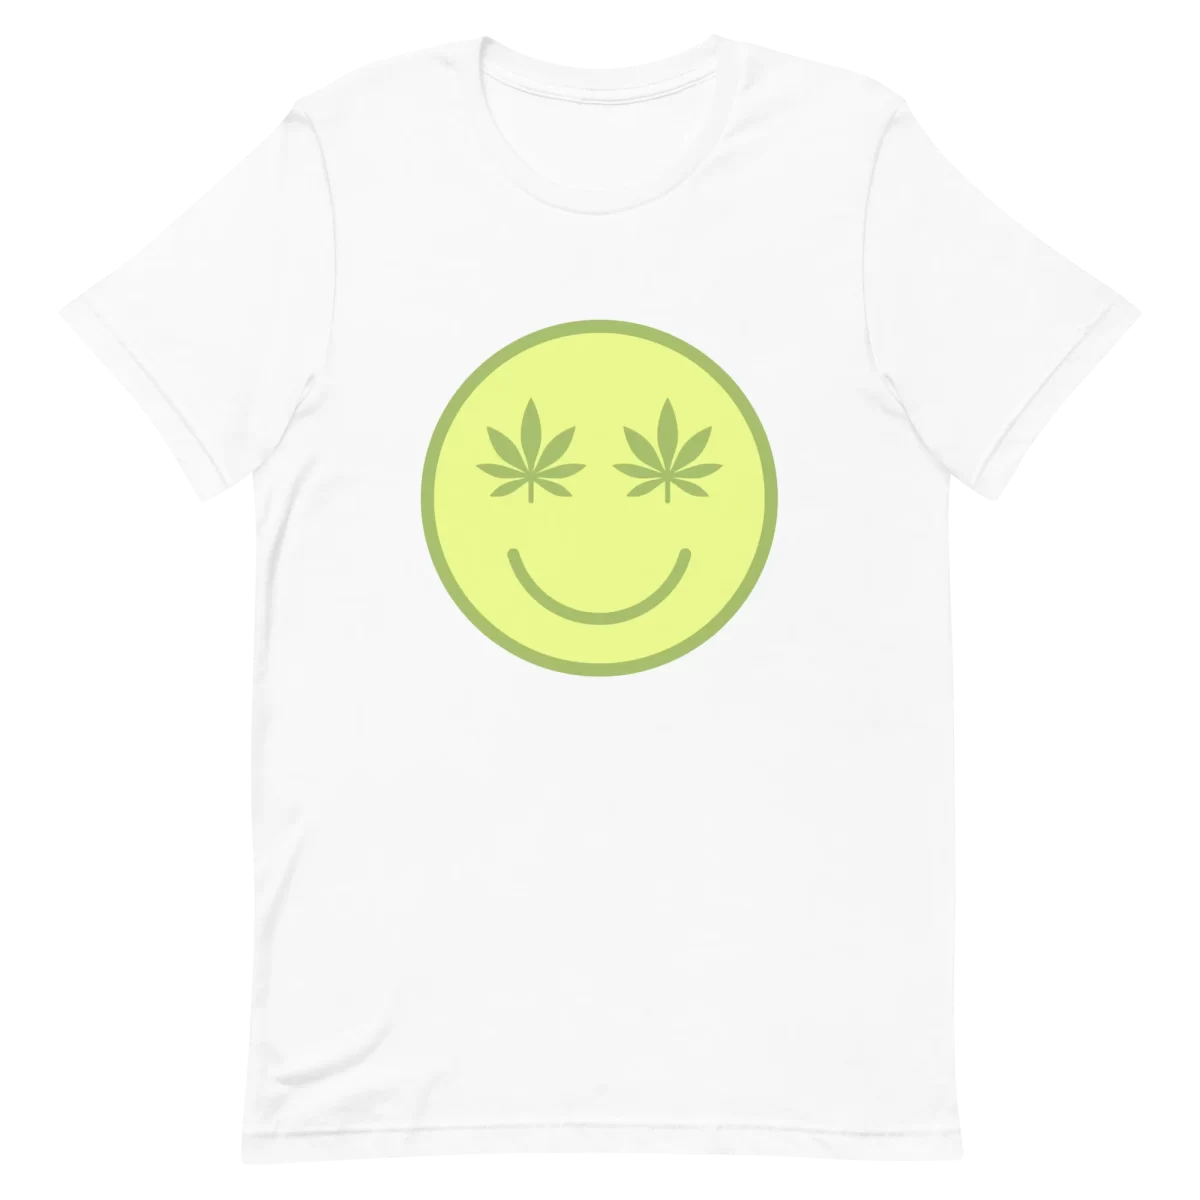 Unisex T-Shirt - Smiley Face with weed - White